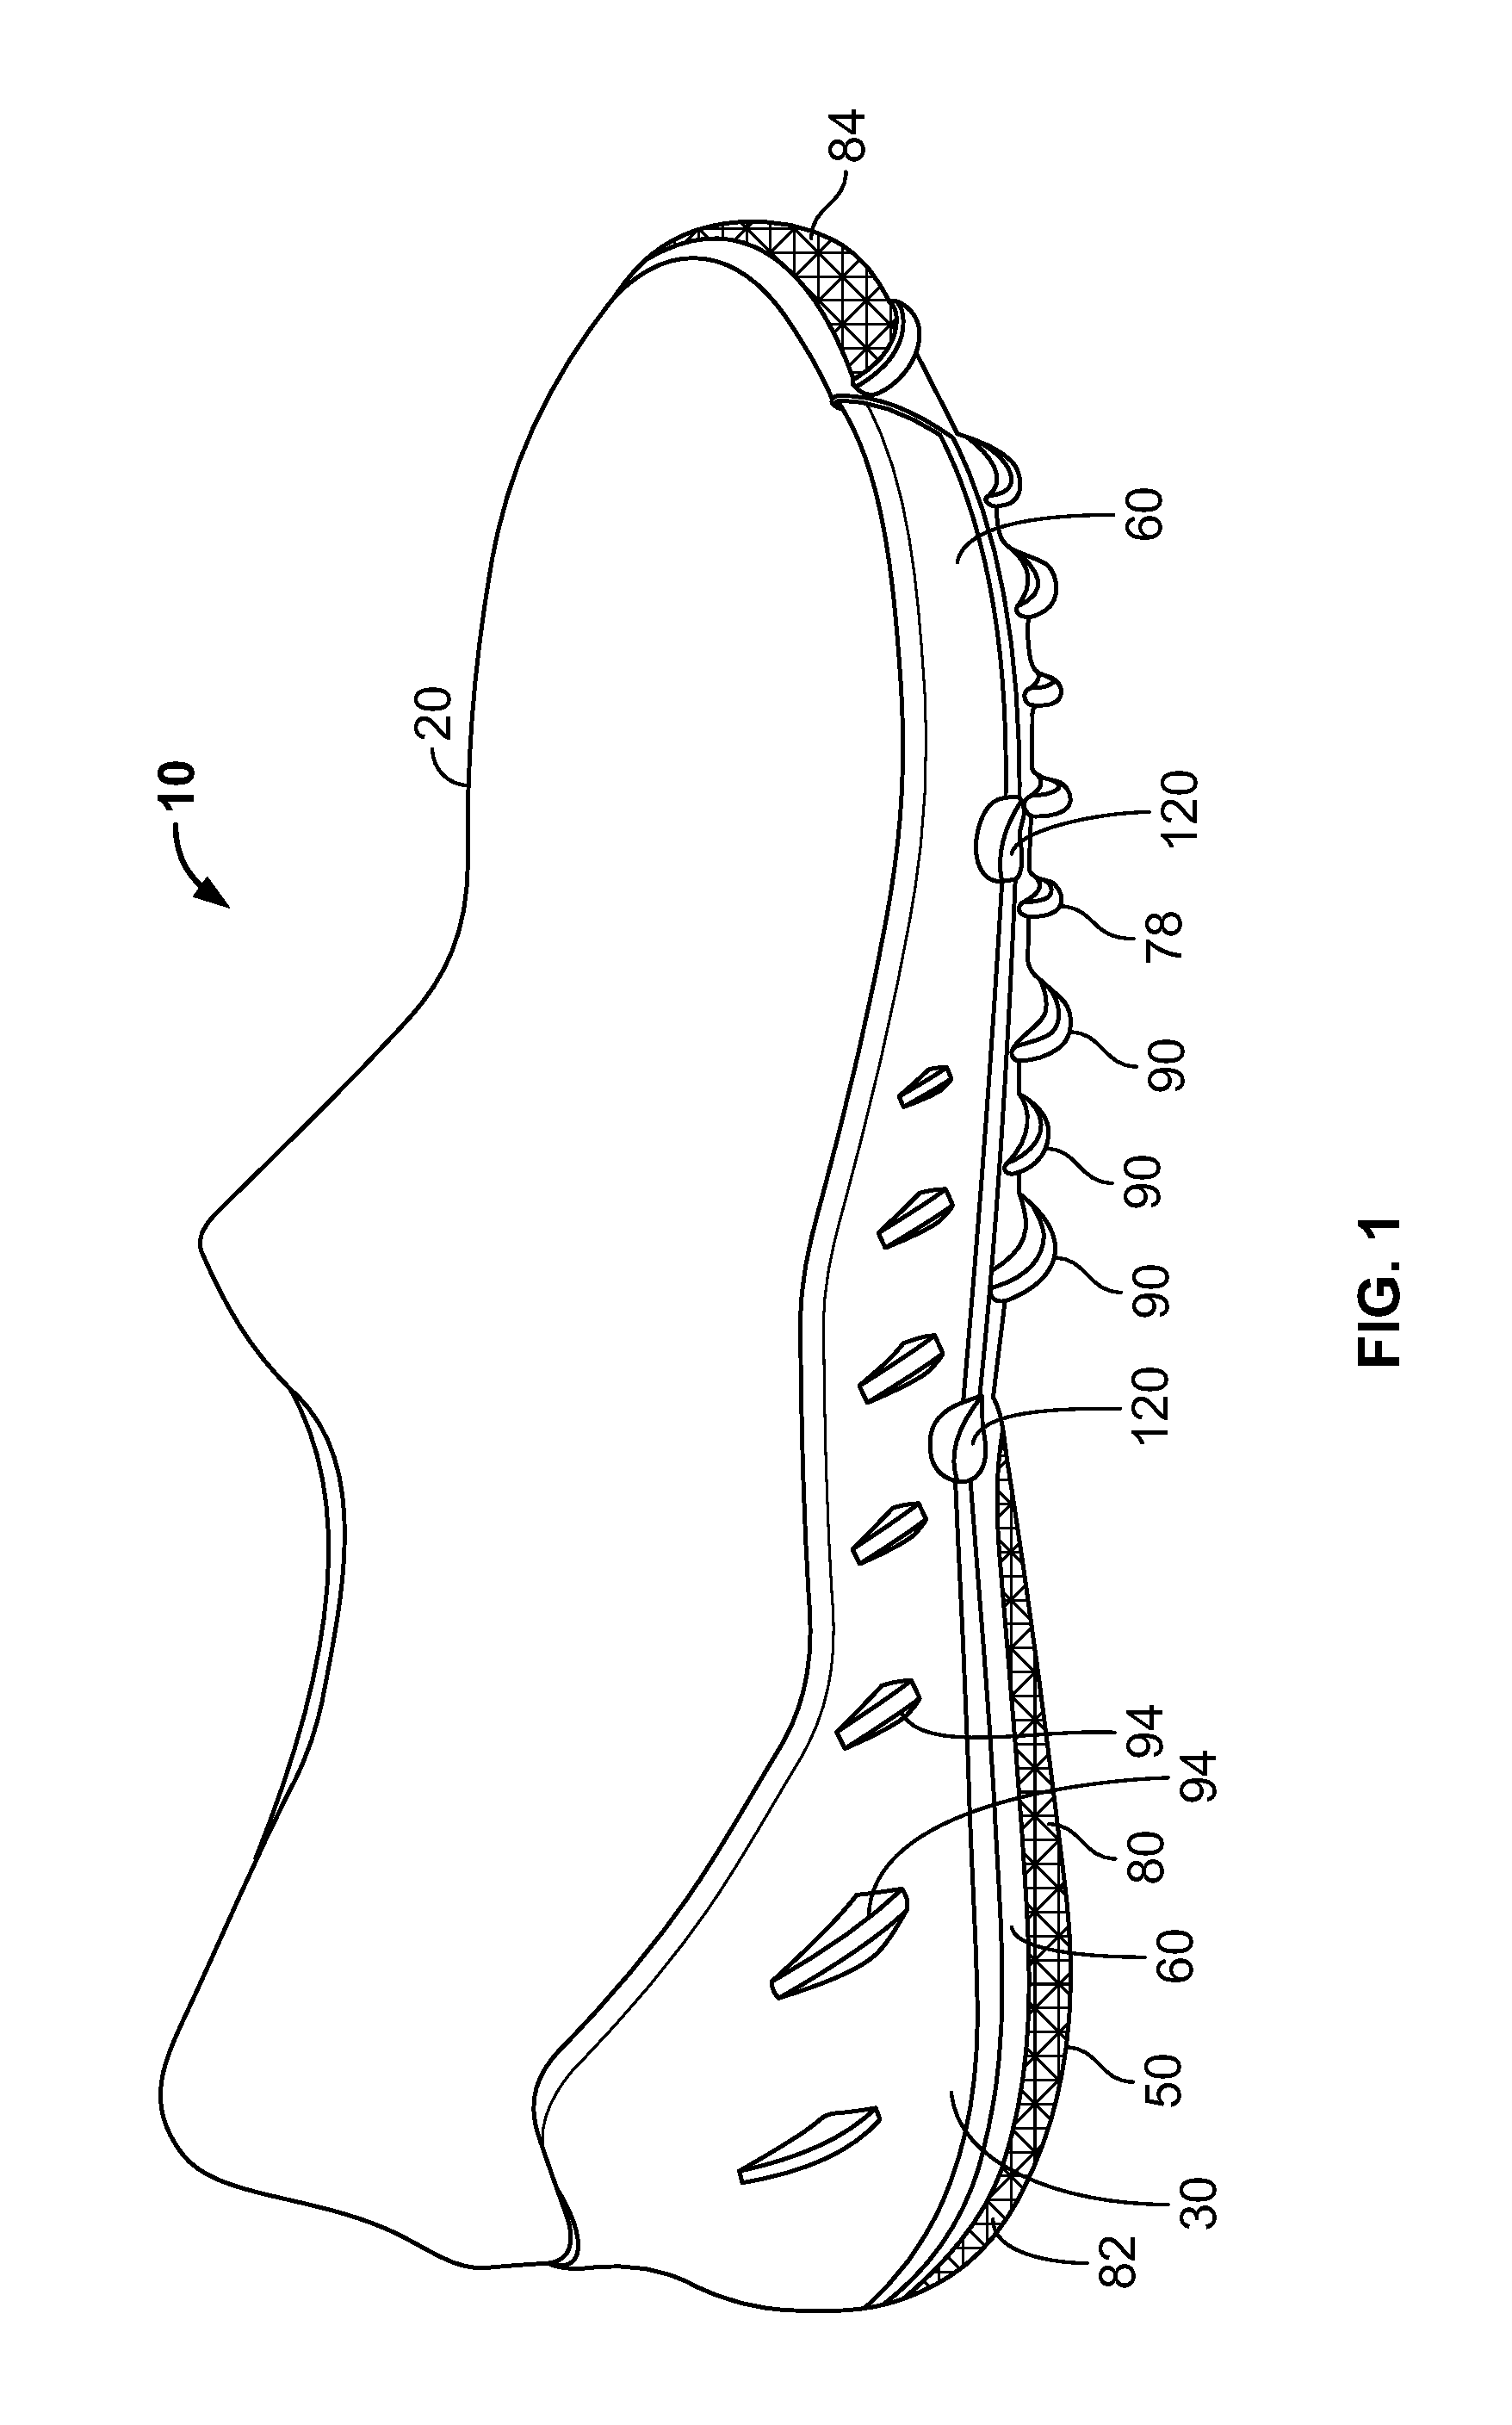 Footwear with pontoon sole structure